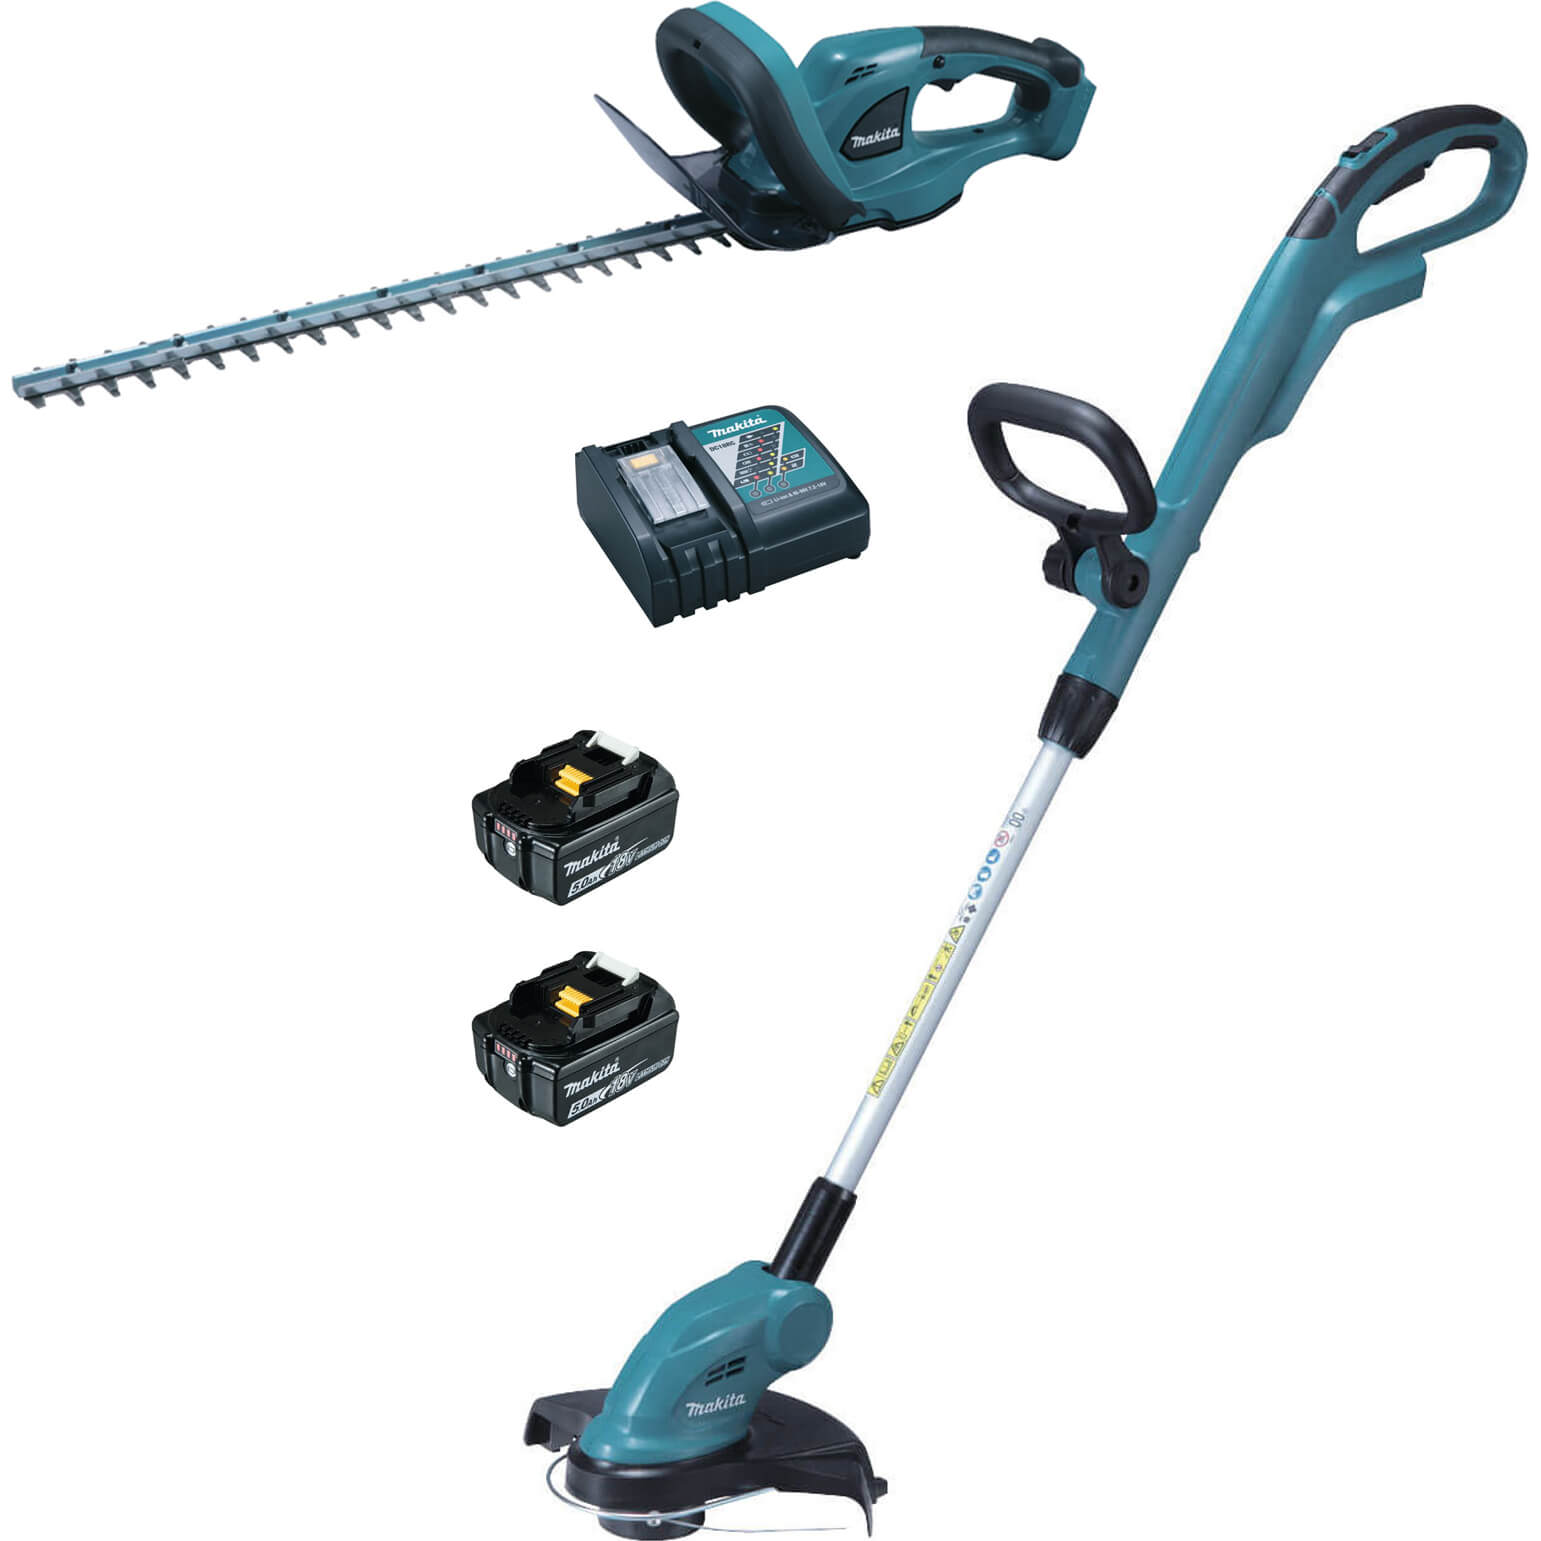 Image of Makita 18v LXT Cordless Grass and Hedge Trimmer Kit 2 x 5ah Li-ion Charger